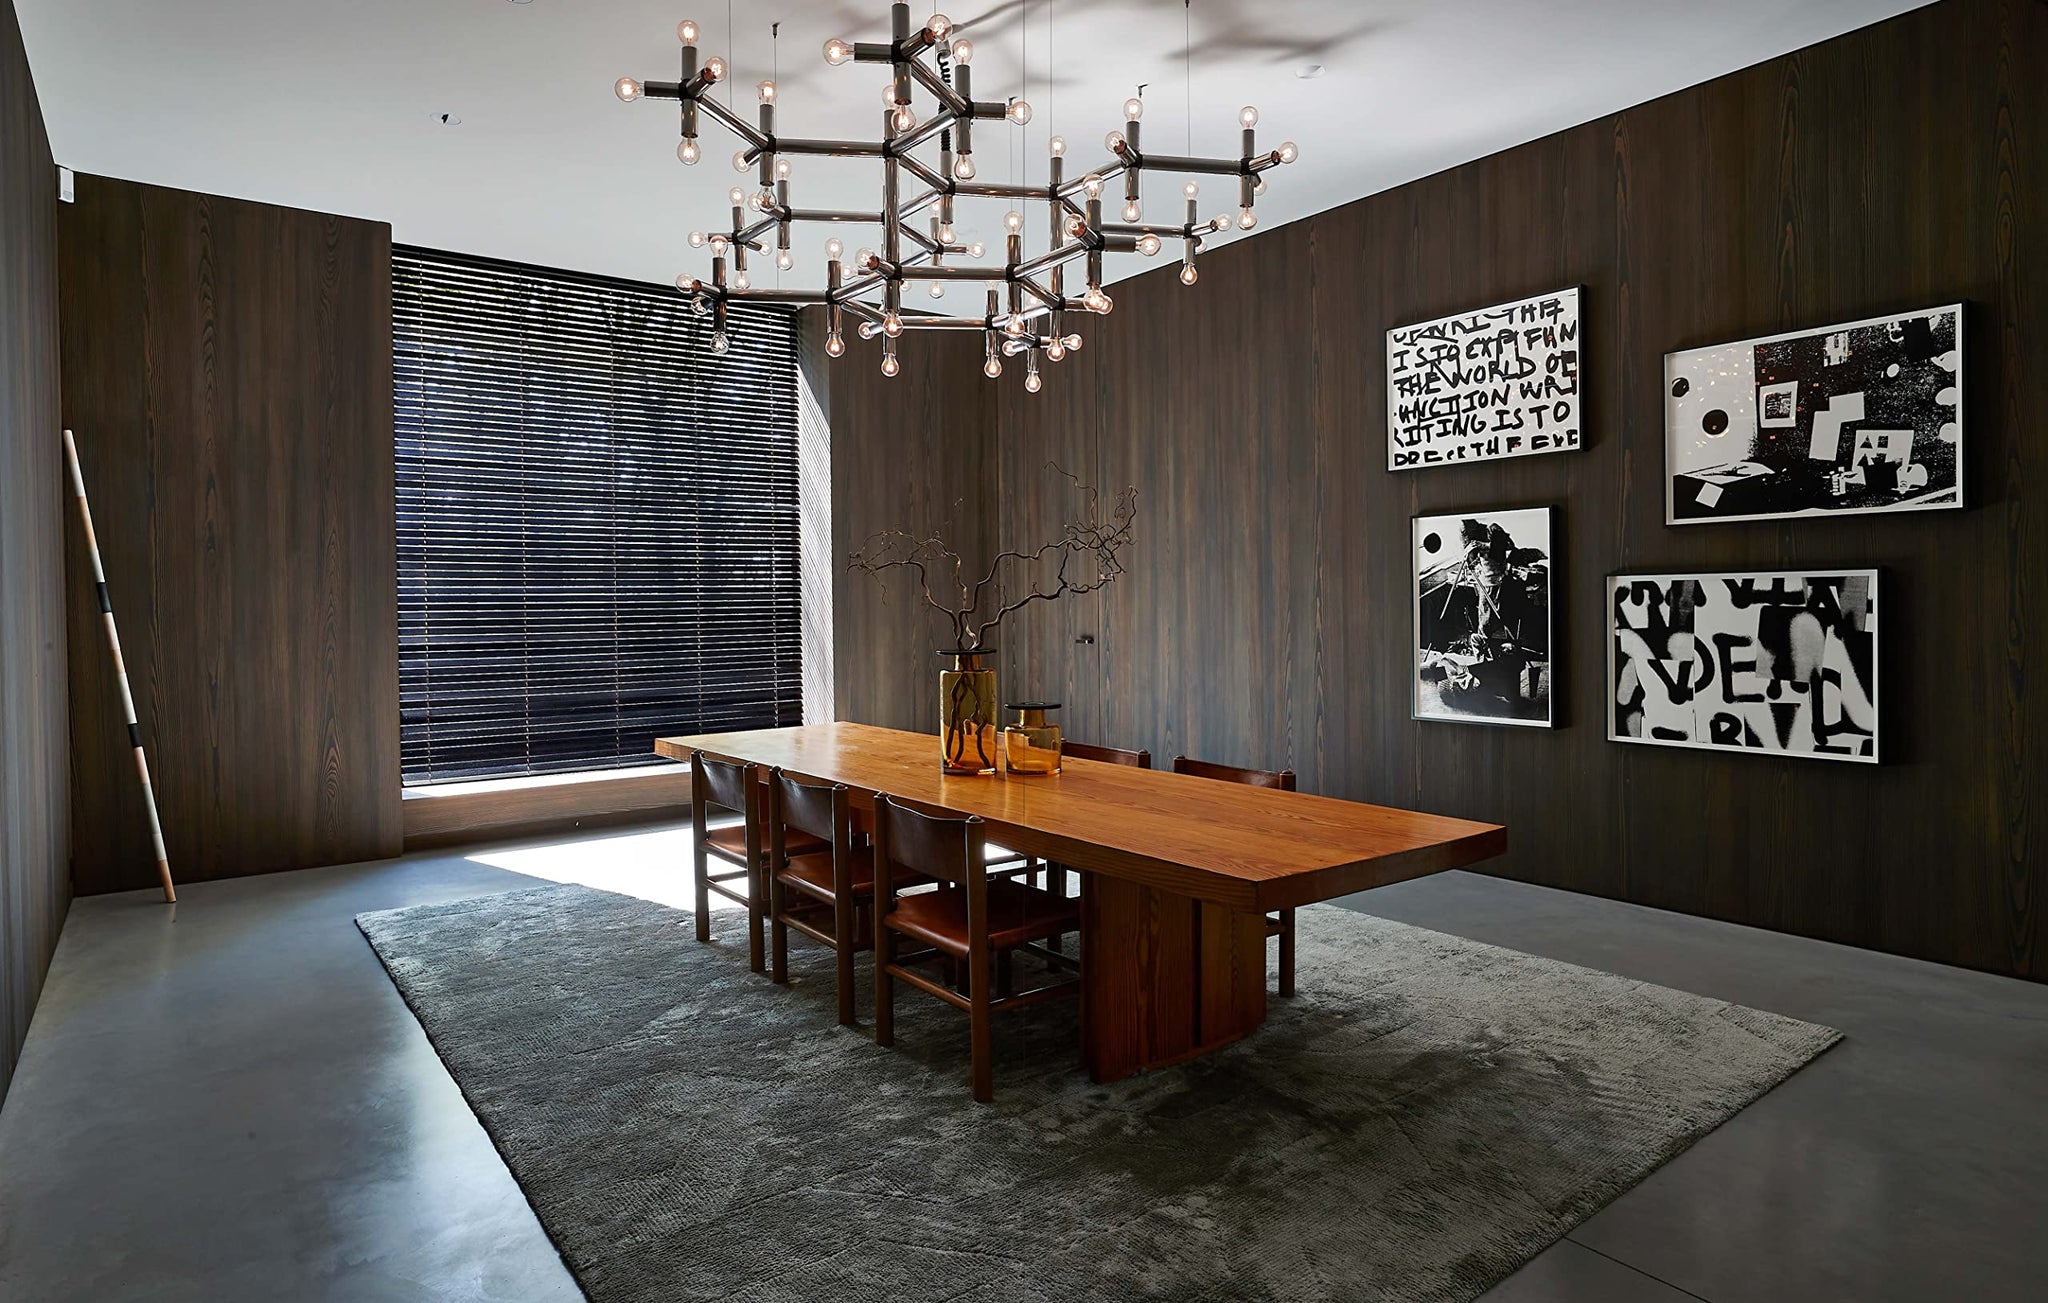 HOMES FOR COLLECTORS: INTERIORS FOR ART & DESIGN LOVERS